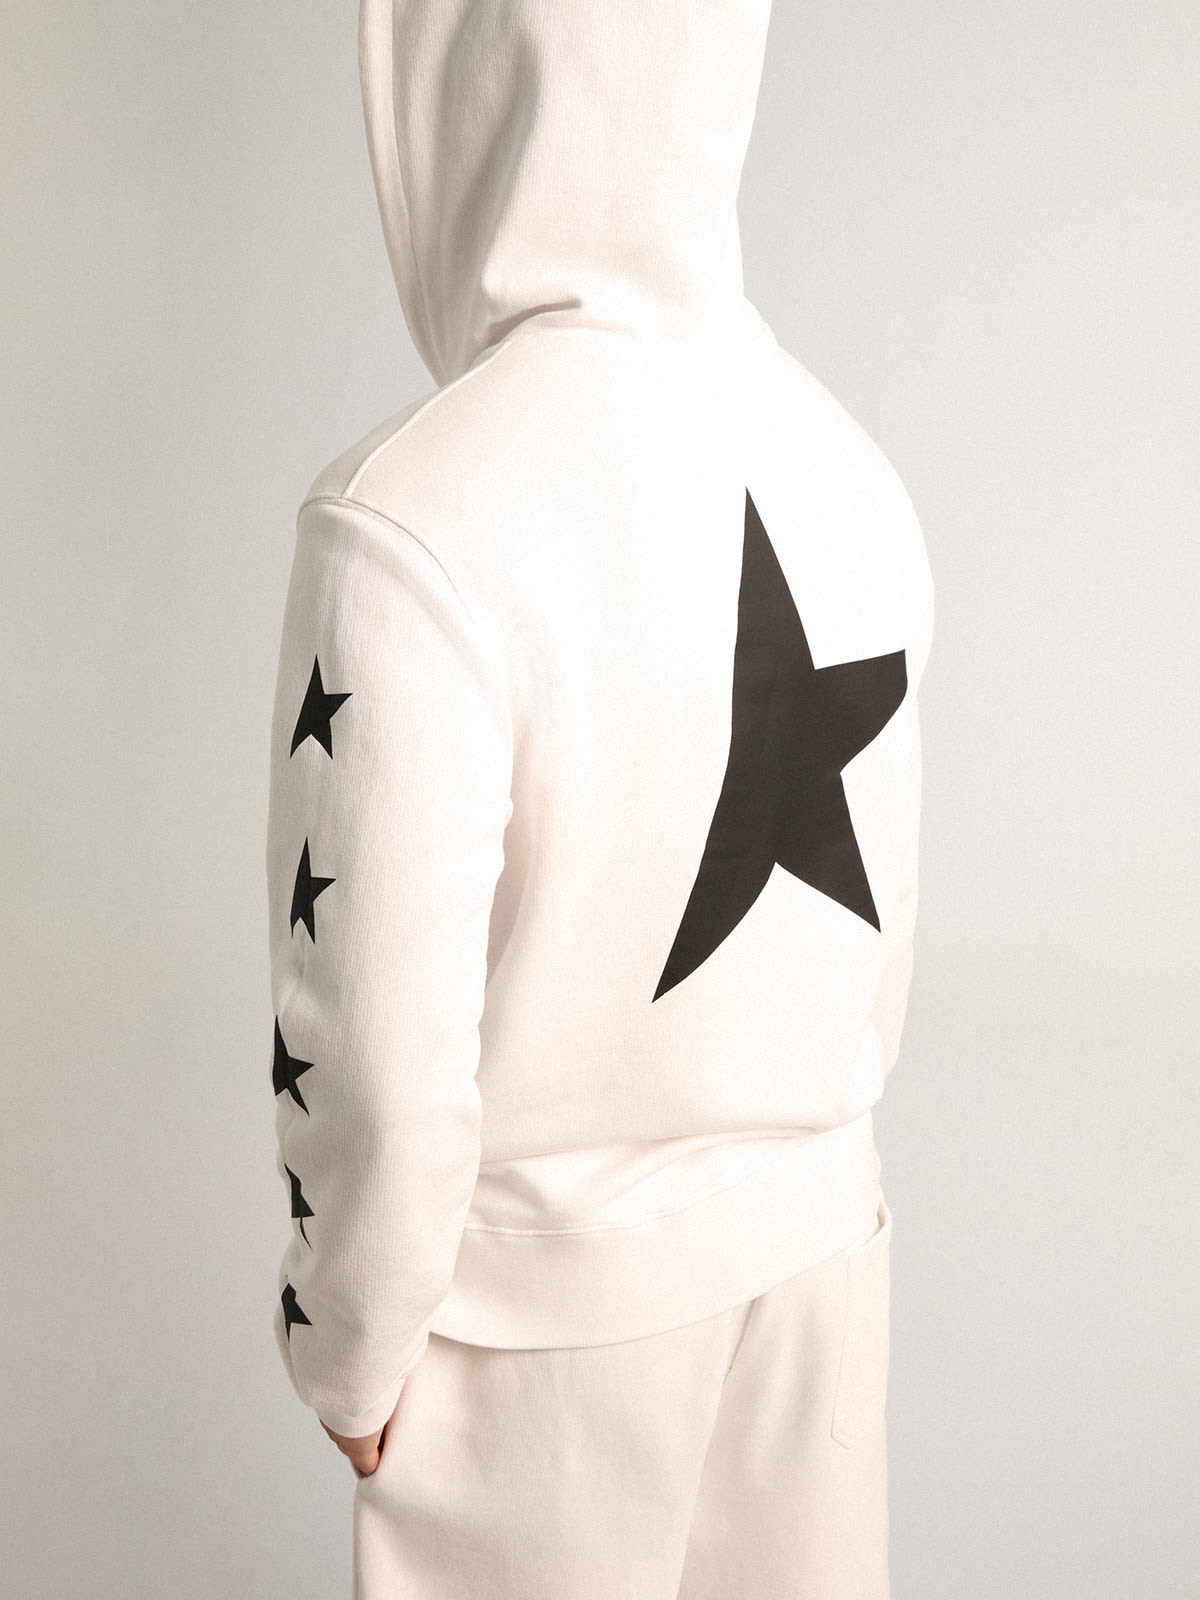 Alighiero Star Collection hooded sweatshirt in vintage white with contrasting black stars - 4